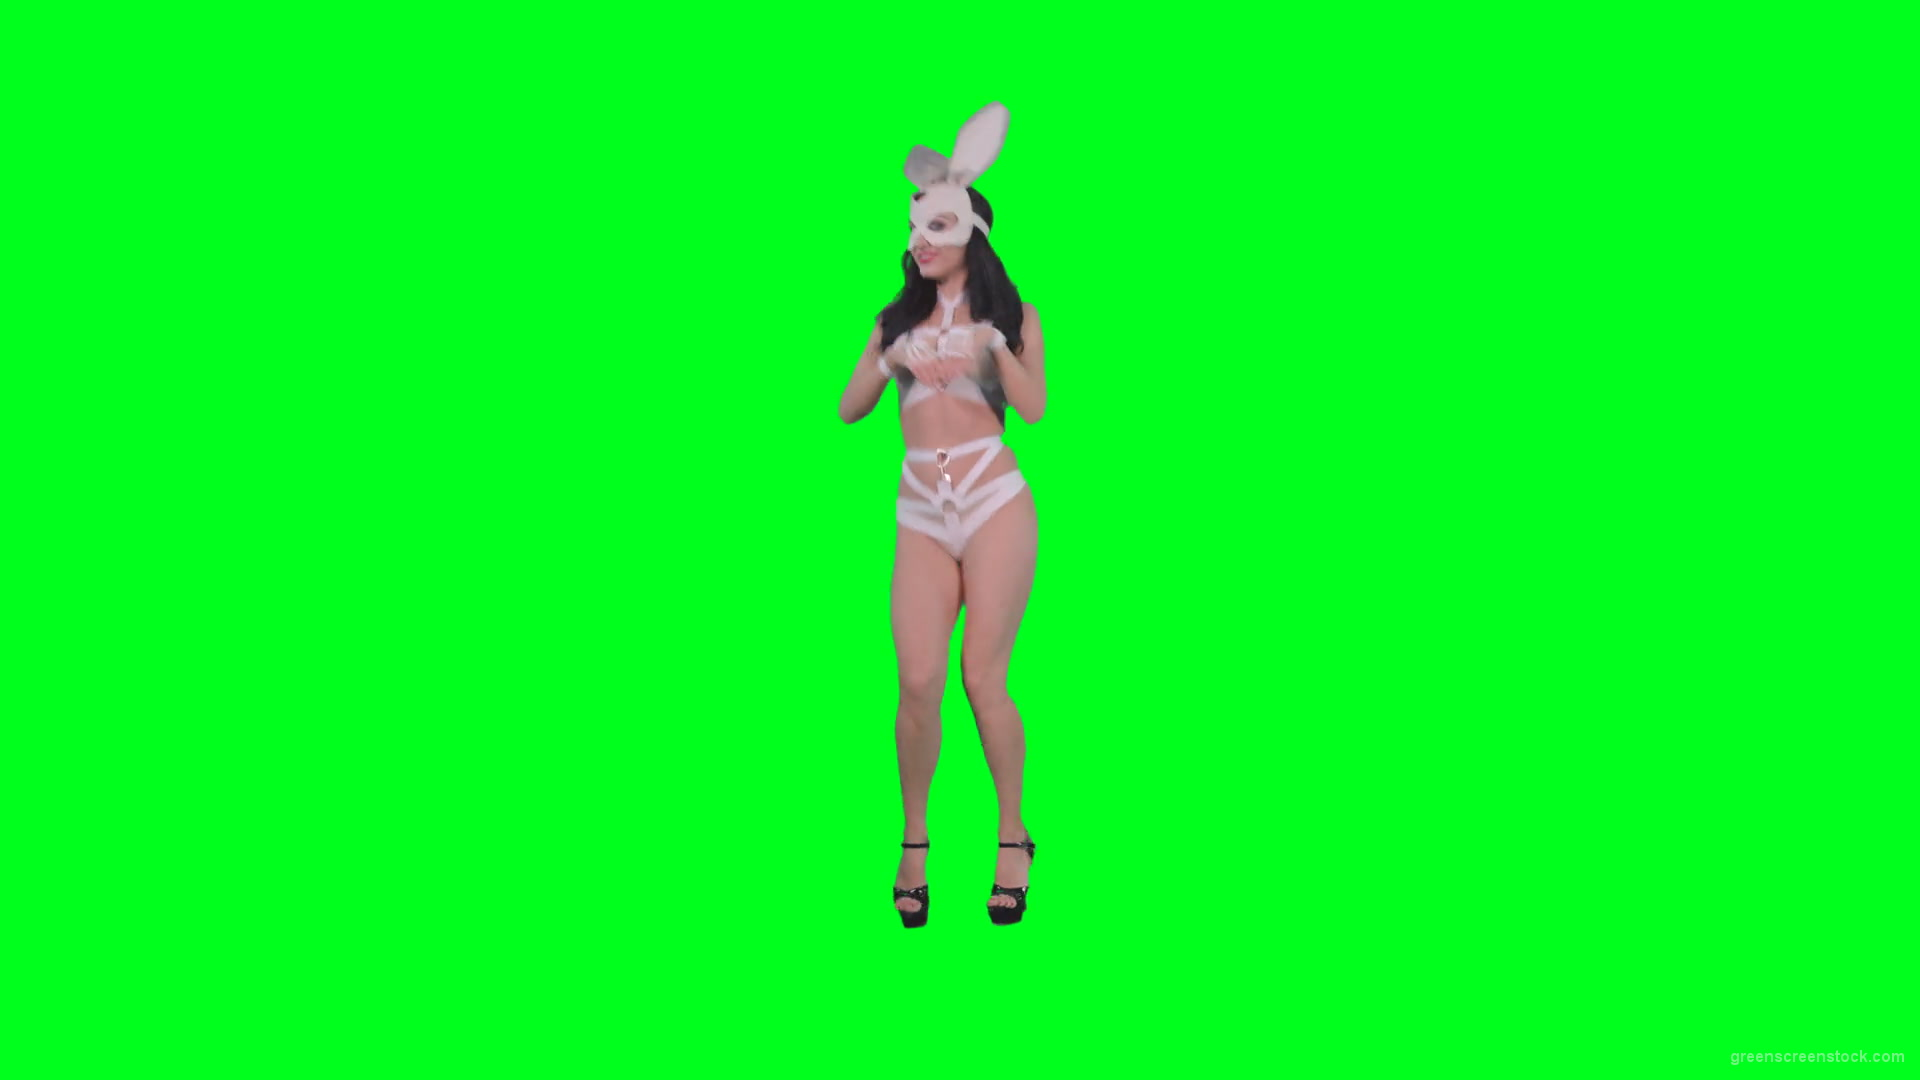 Sexy-woman-jumping-in-Go-Go-style-in-rabbit-mask-on-green-screen-4K-Video-Footage-1920_006 Green Screen Stock